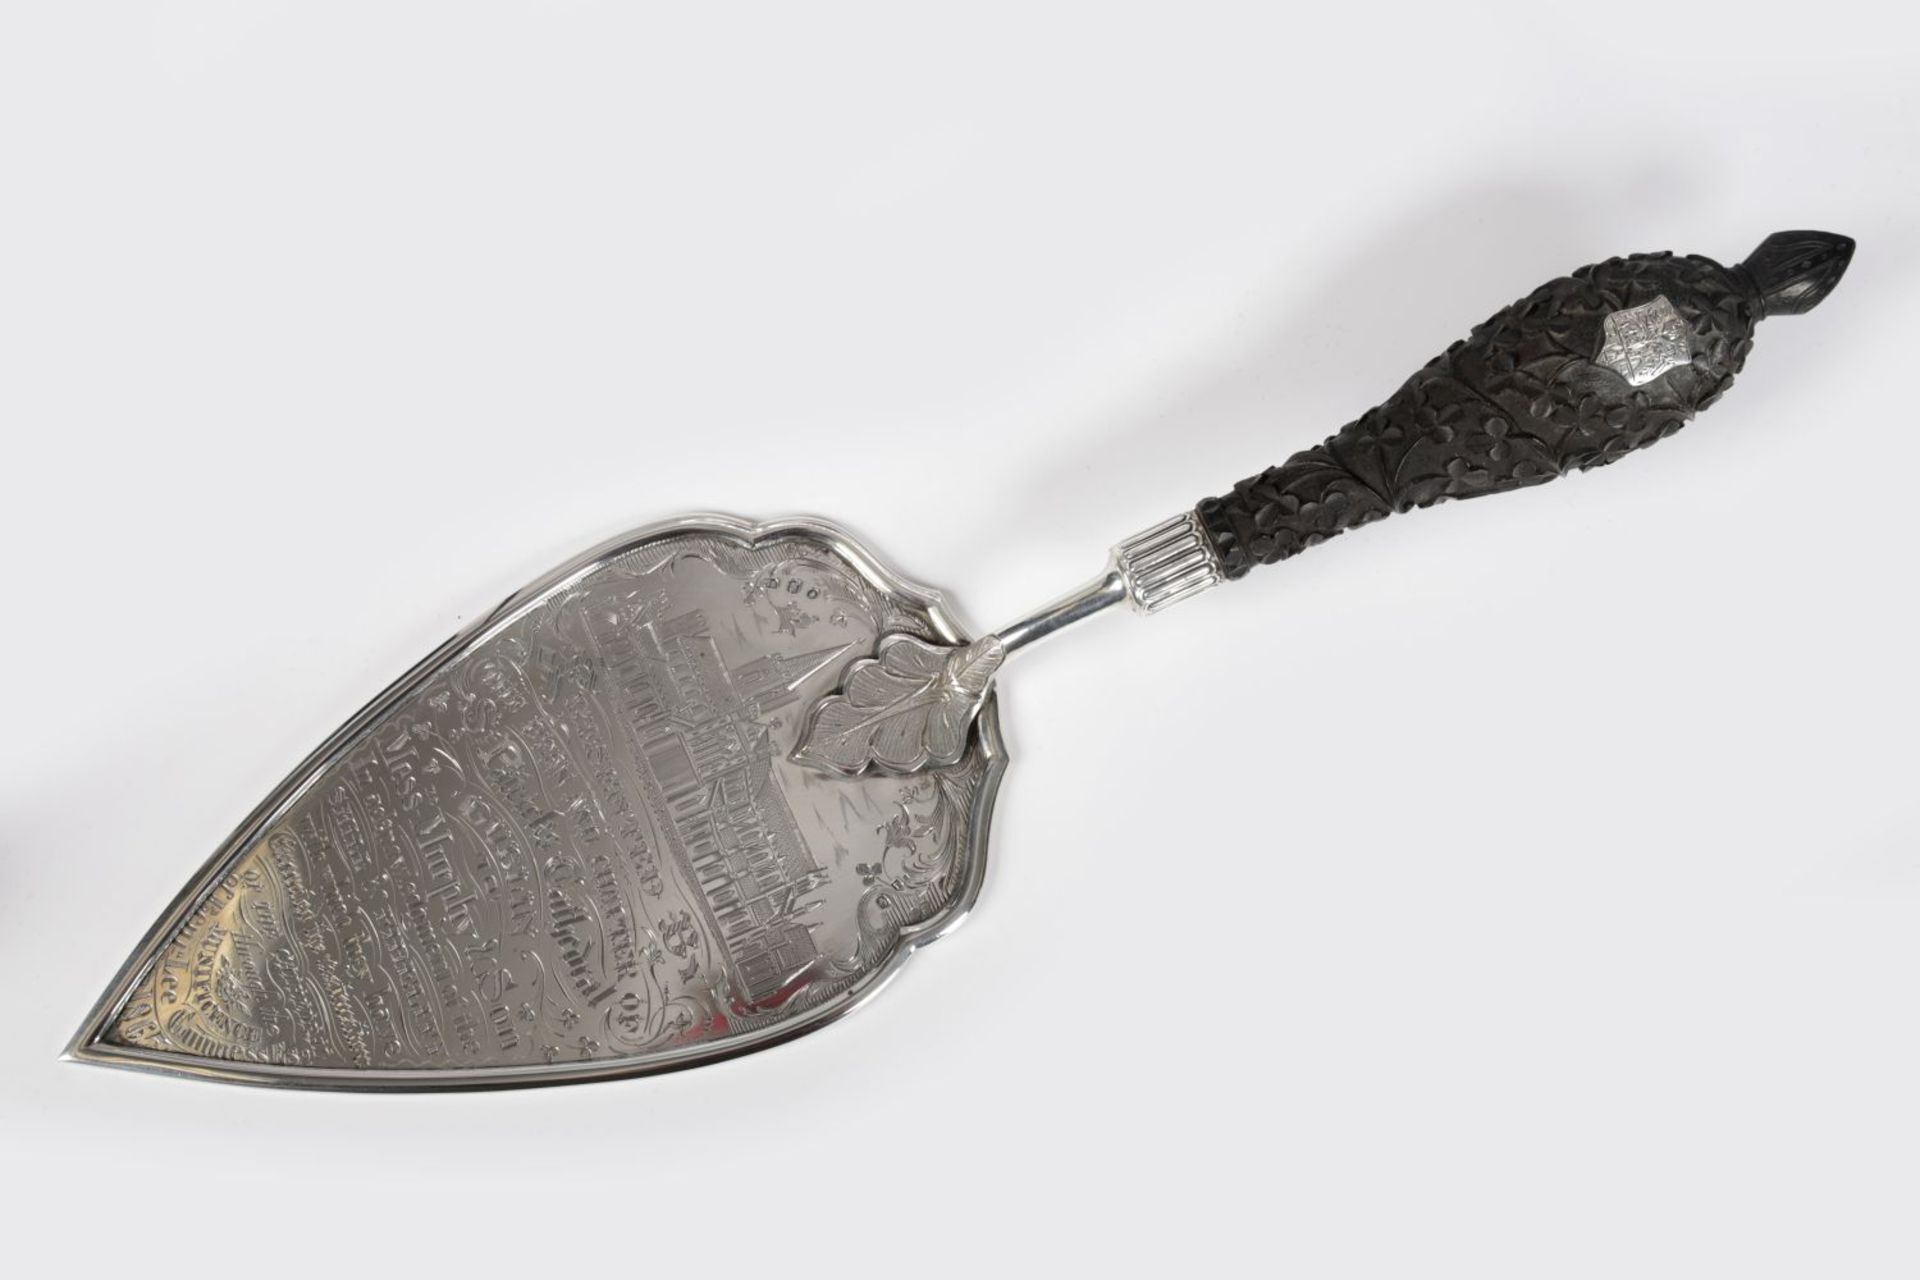 ST. PATRICK'S CATHEDRAL SILVER PRESENTATION TROWEL - Image 3 of 4